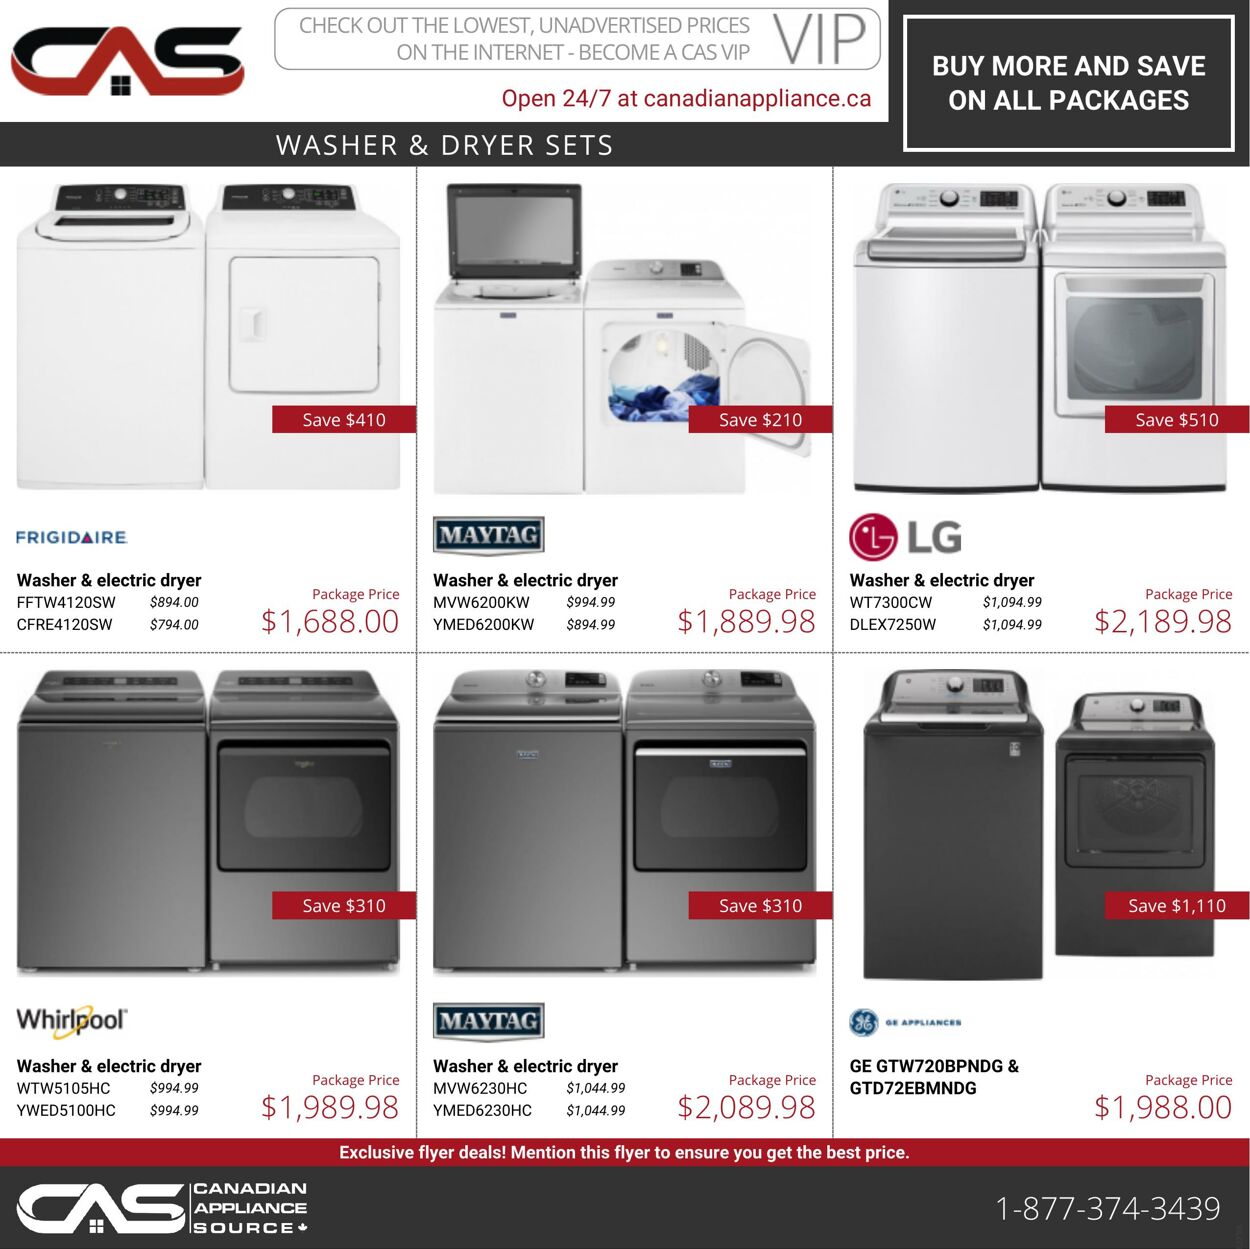 Flyer Canadian Appliance Source 28.07.2022 - 03.08.2022